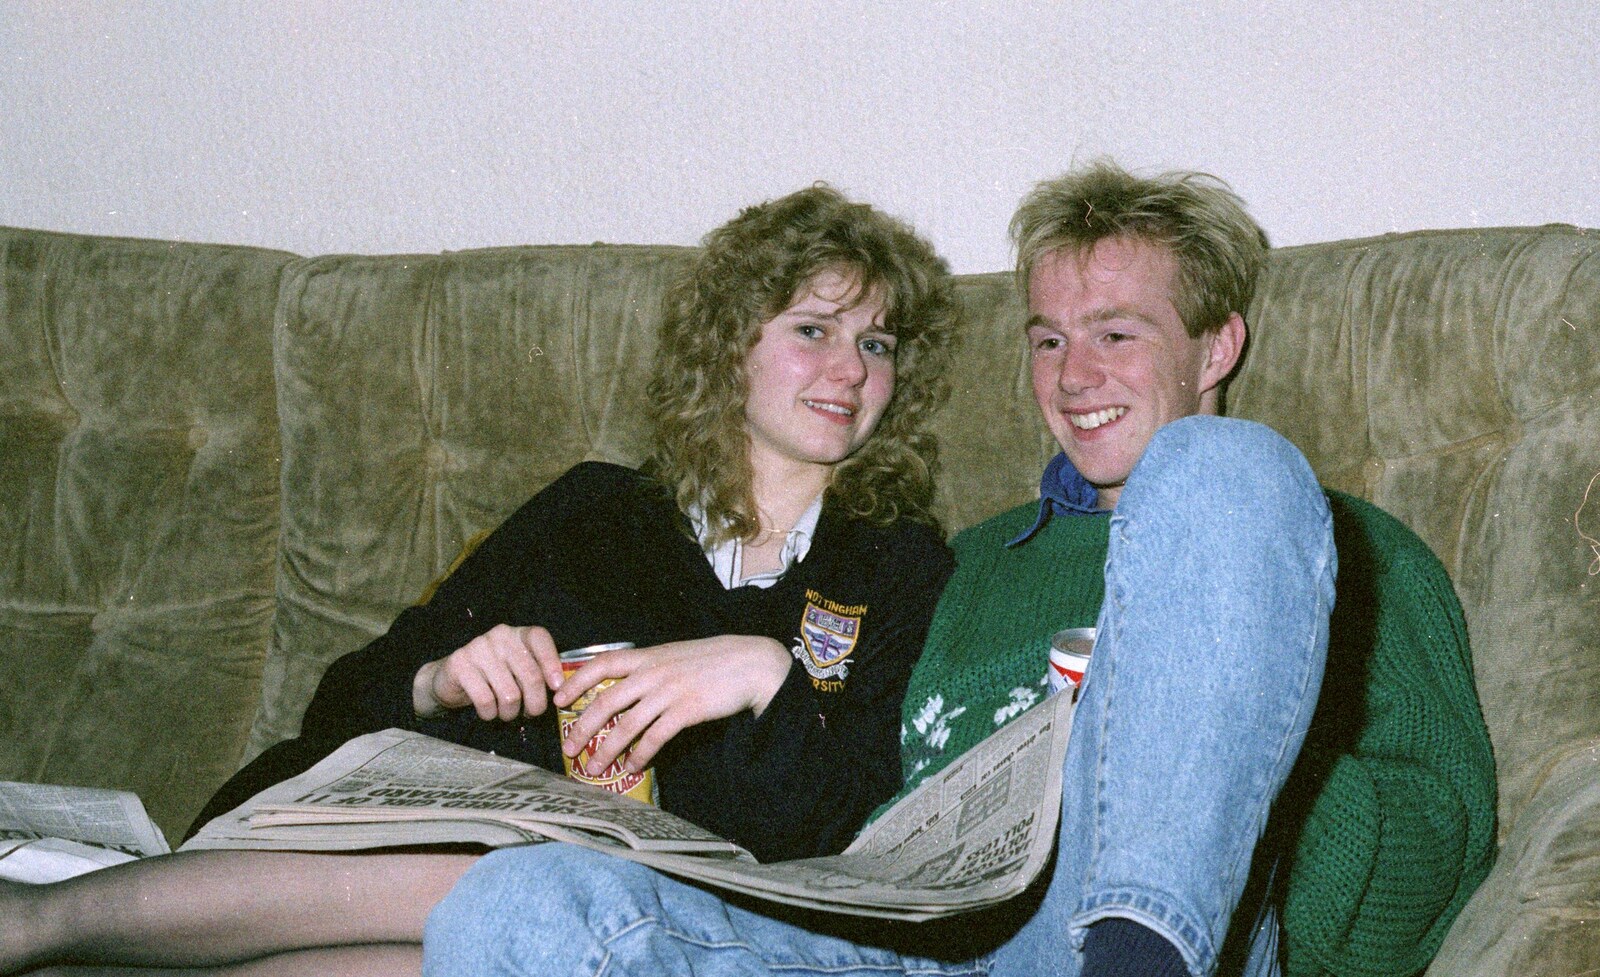 Emma and Martin from Soman-Wherry Footie Action, Norfolk - 25th February 1988